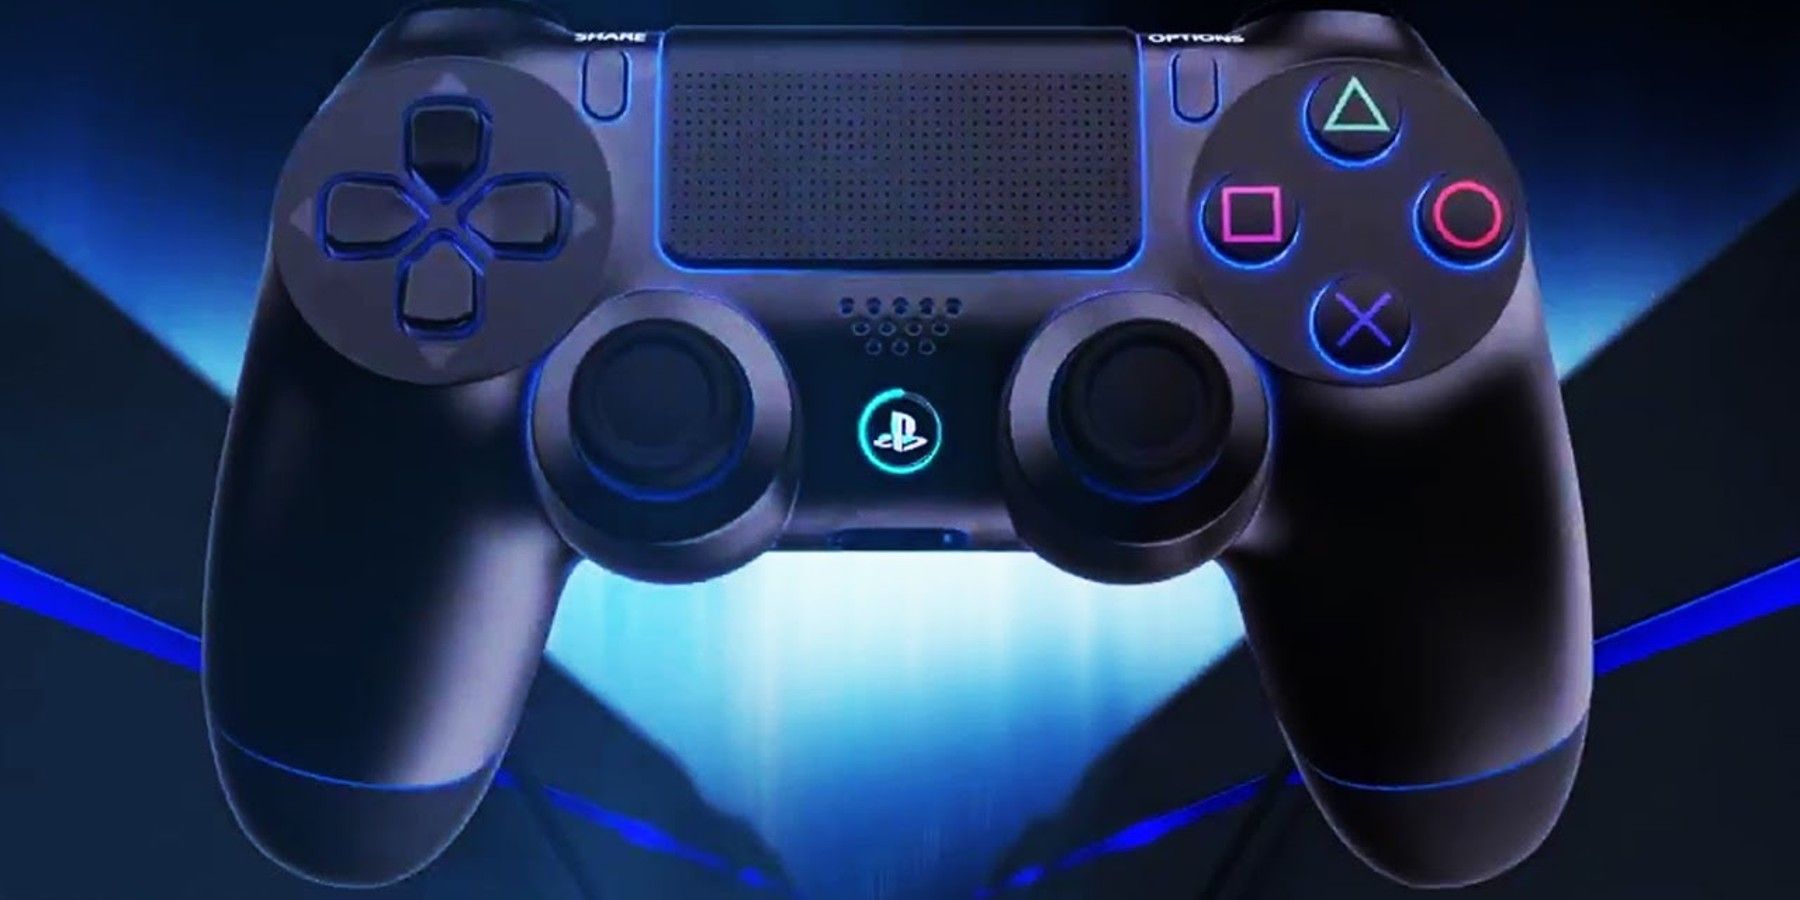 a render of the DualShock 4 controller